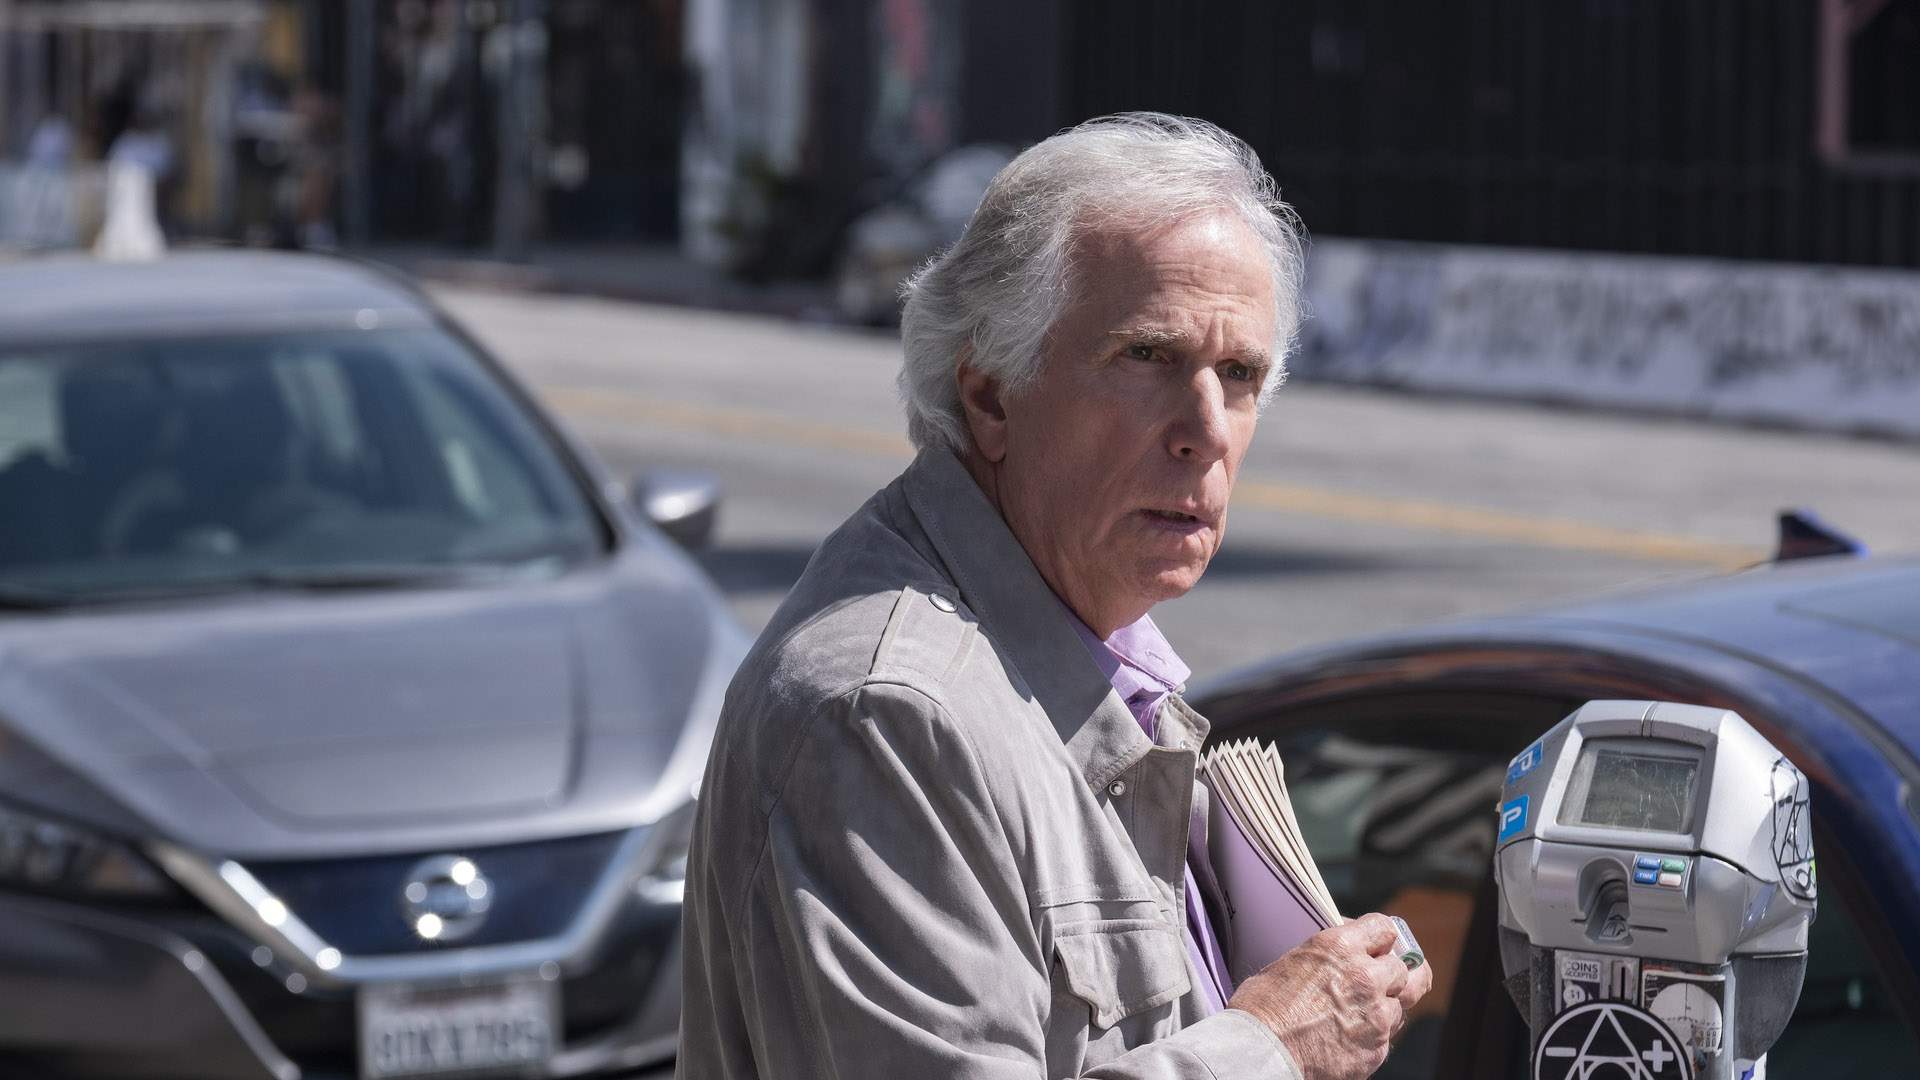 Henry Winkler: The Fonz and Beyond